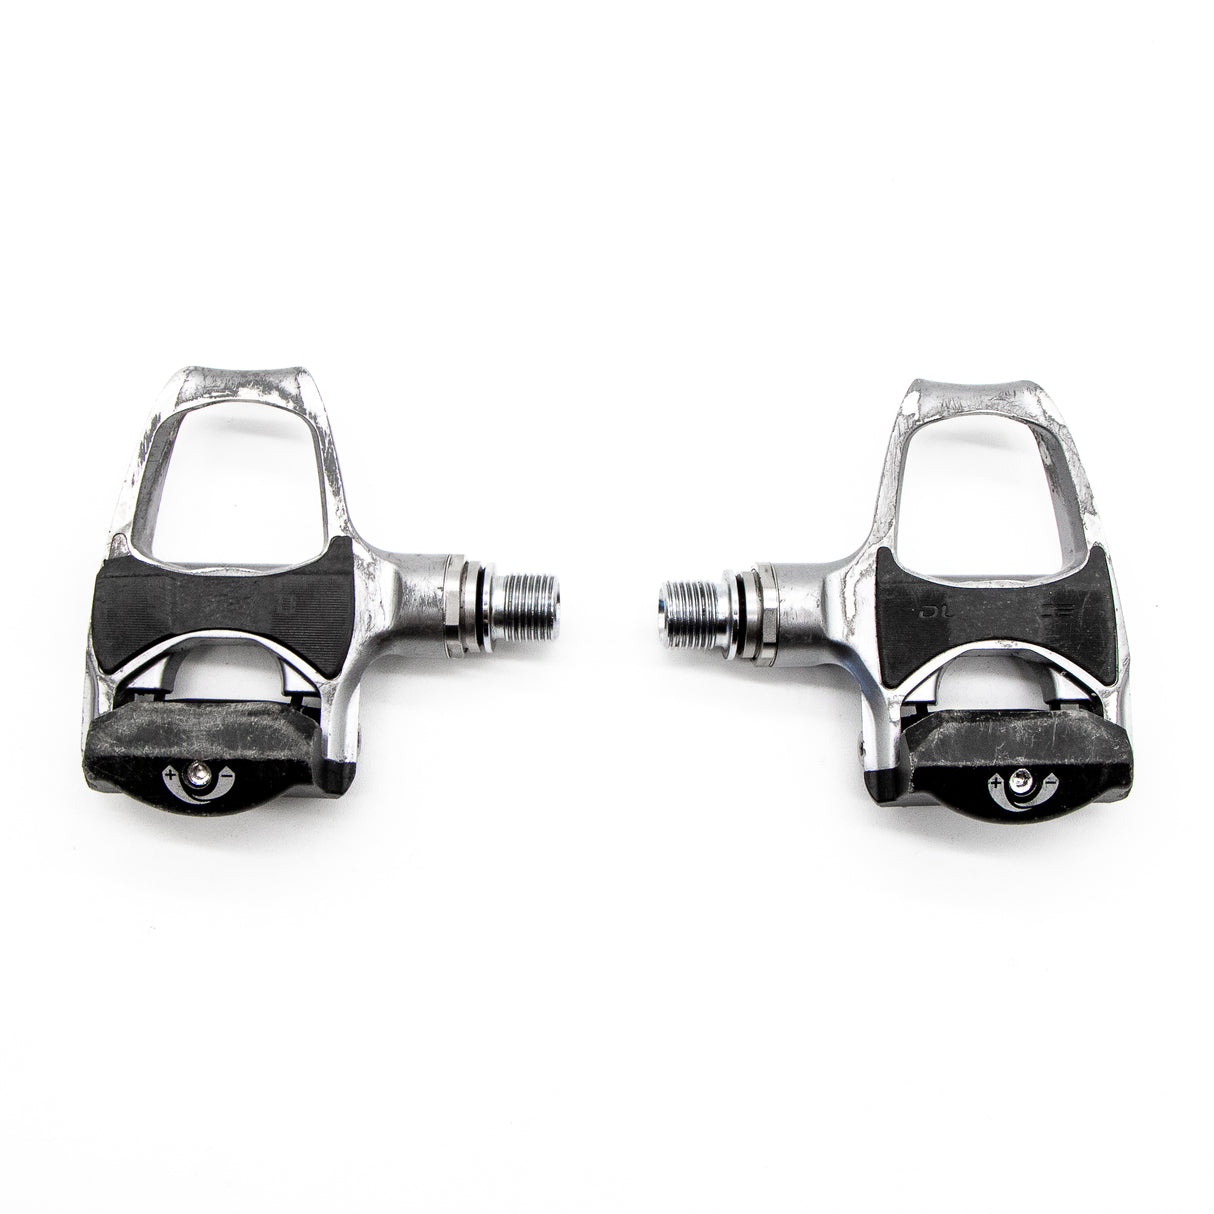 Shimano Dura Ace PD-7800 Clipless Road Pedals 280g